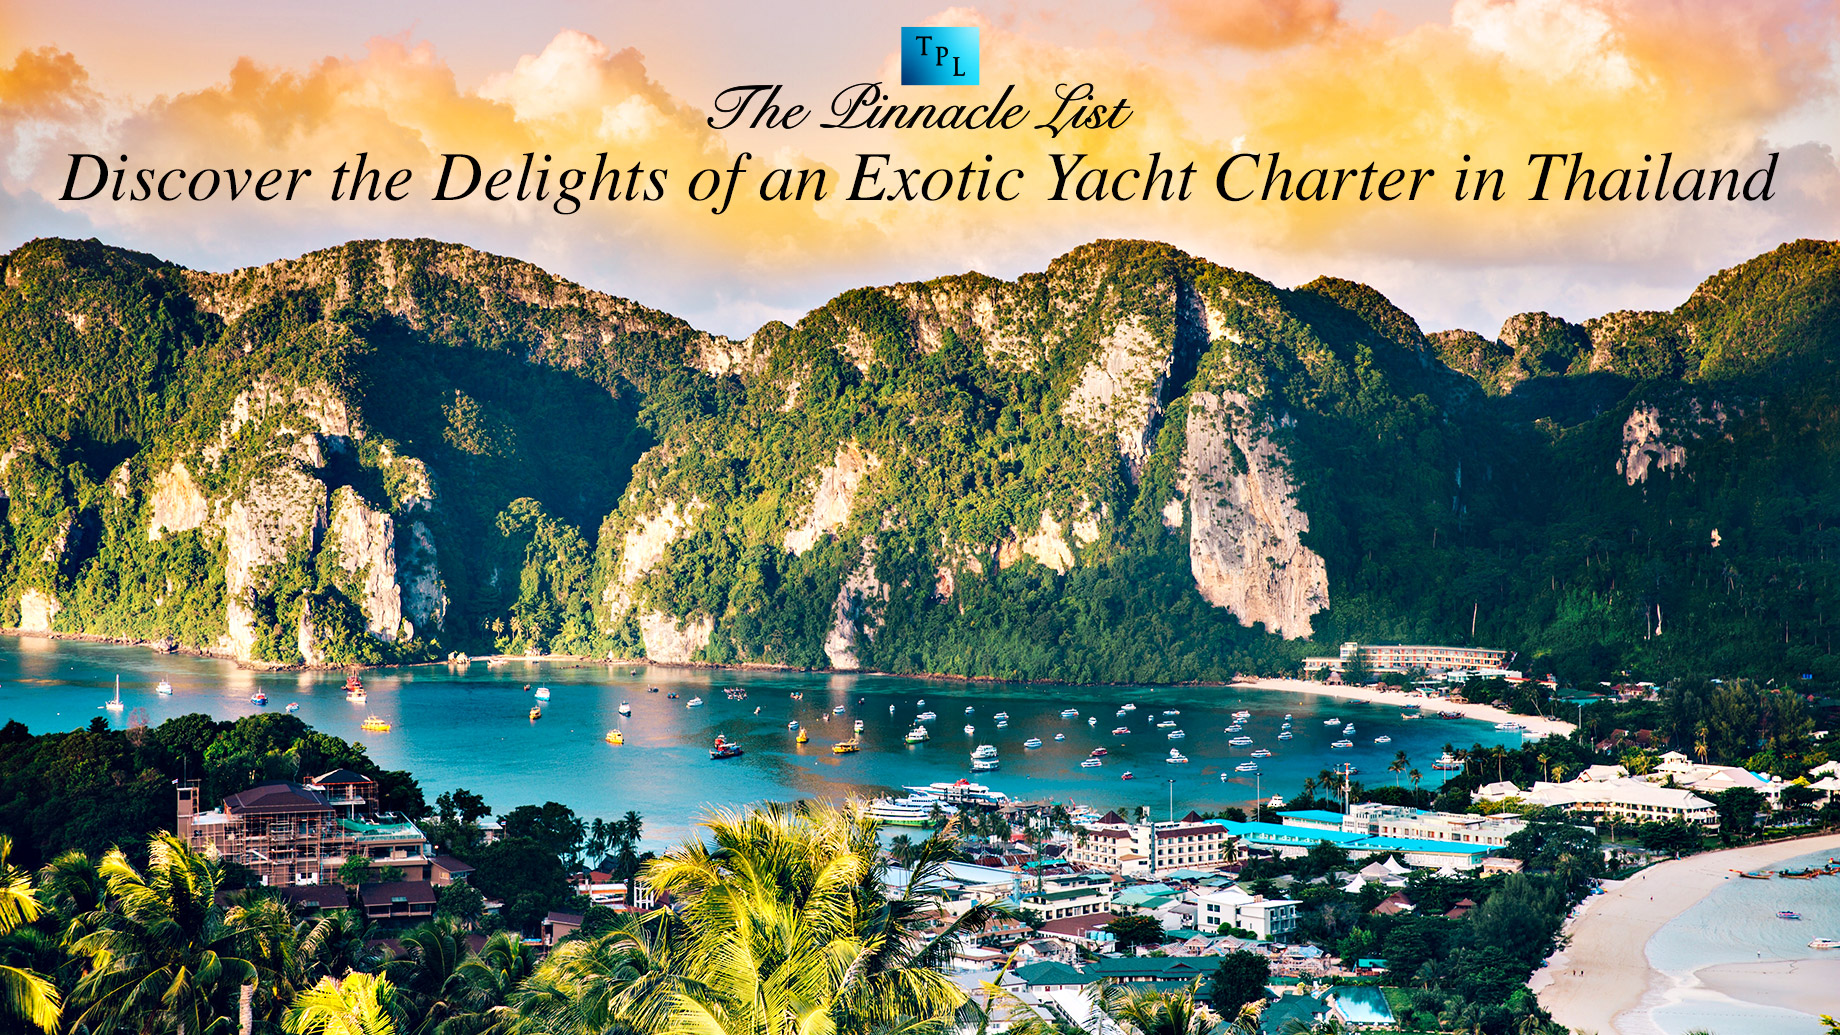 Discover the Delights of an Exotic Yacht Charter in Thailand